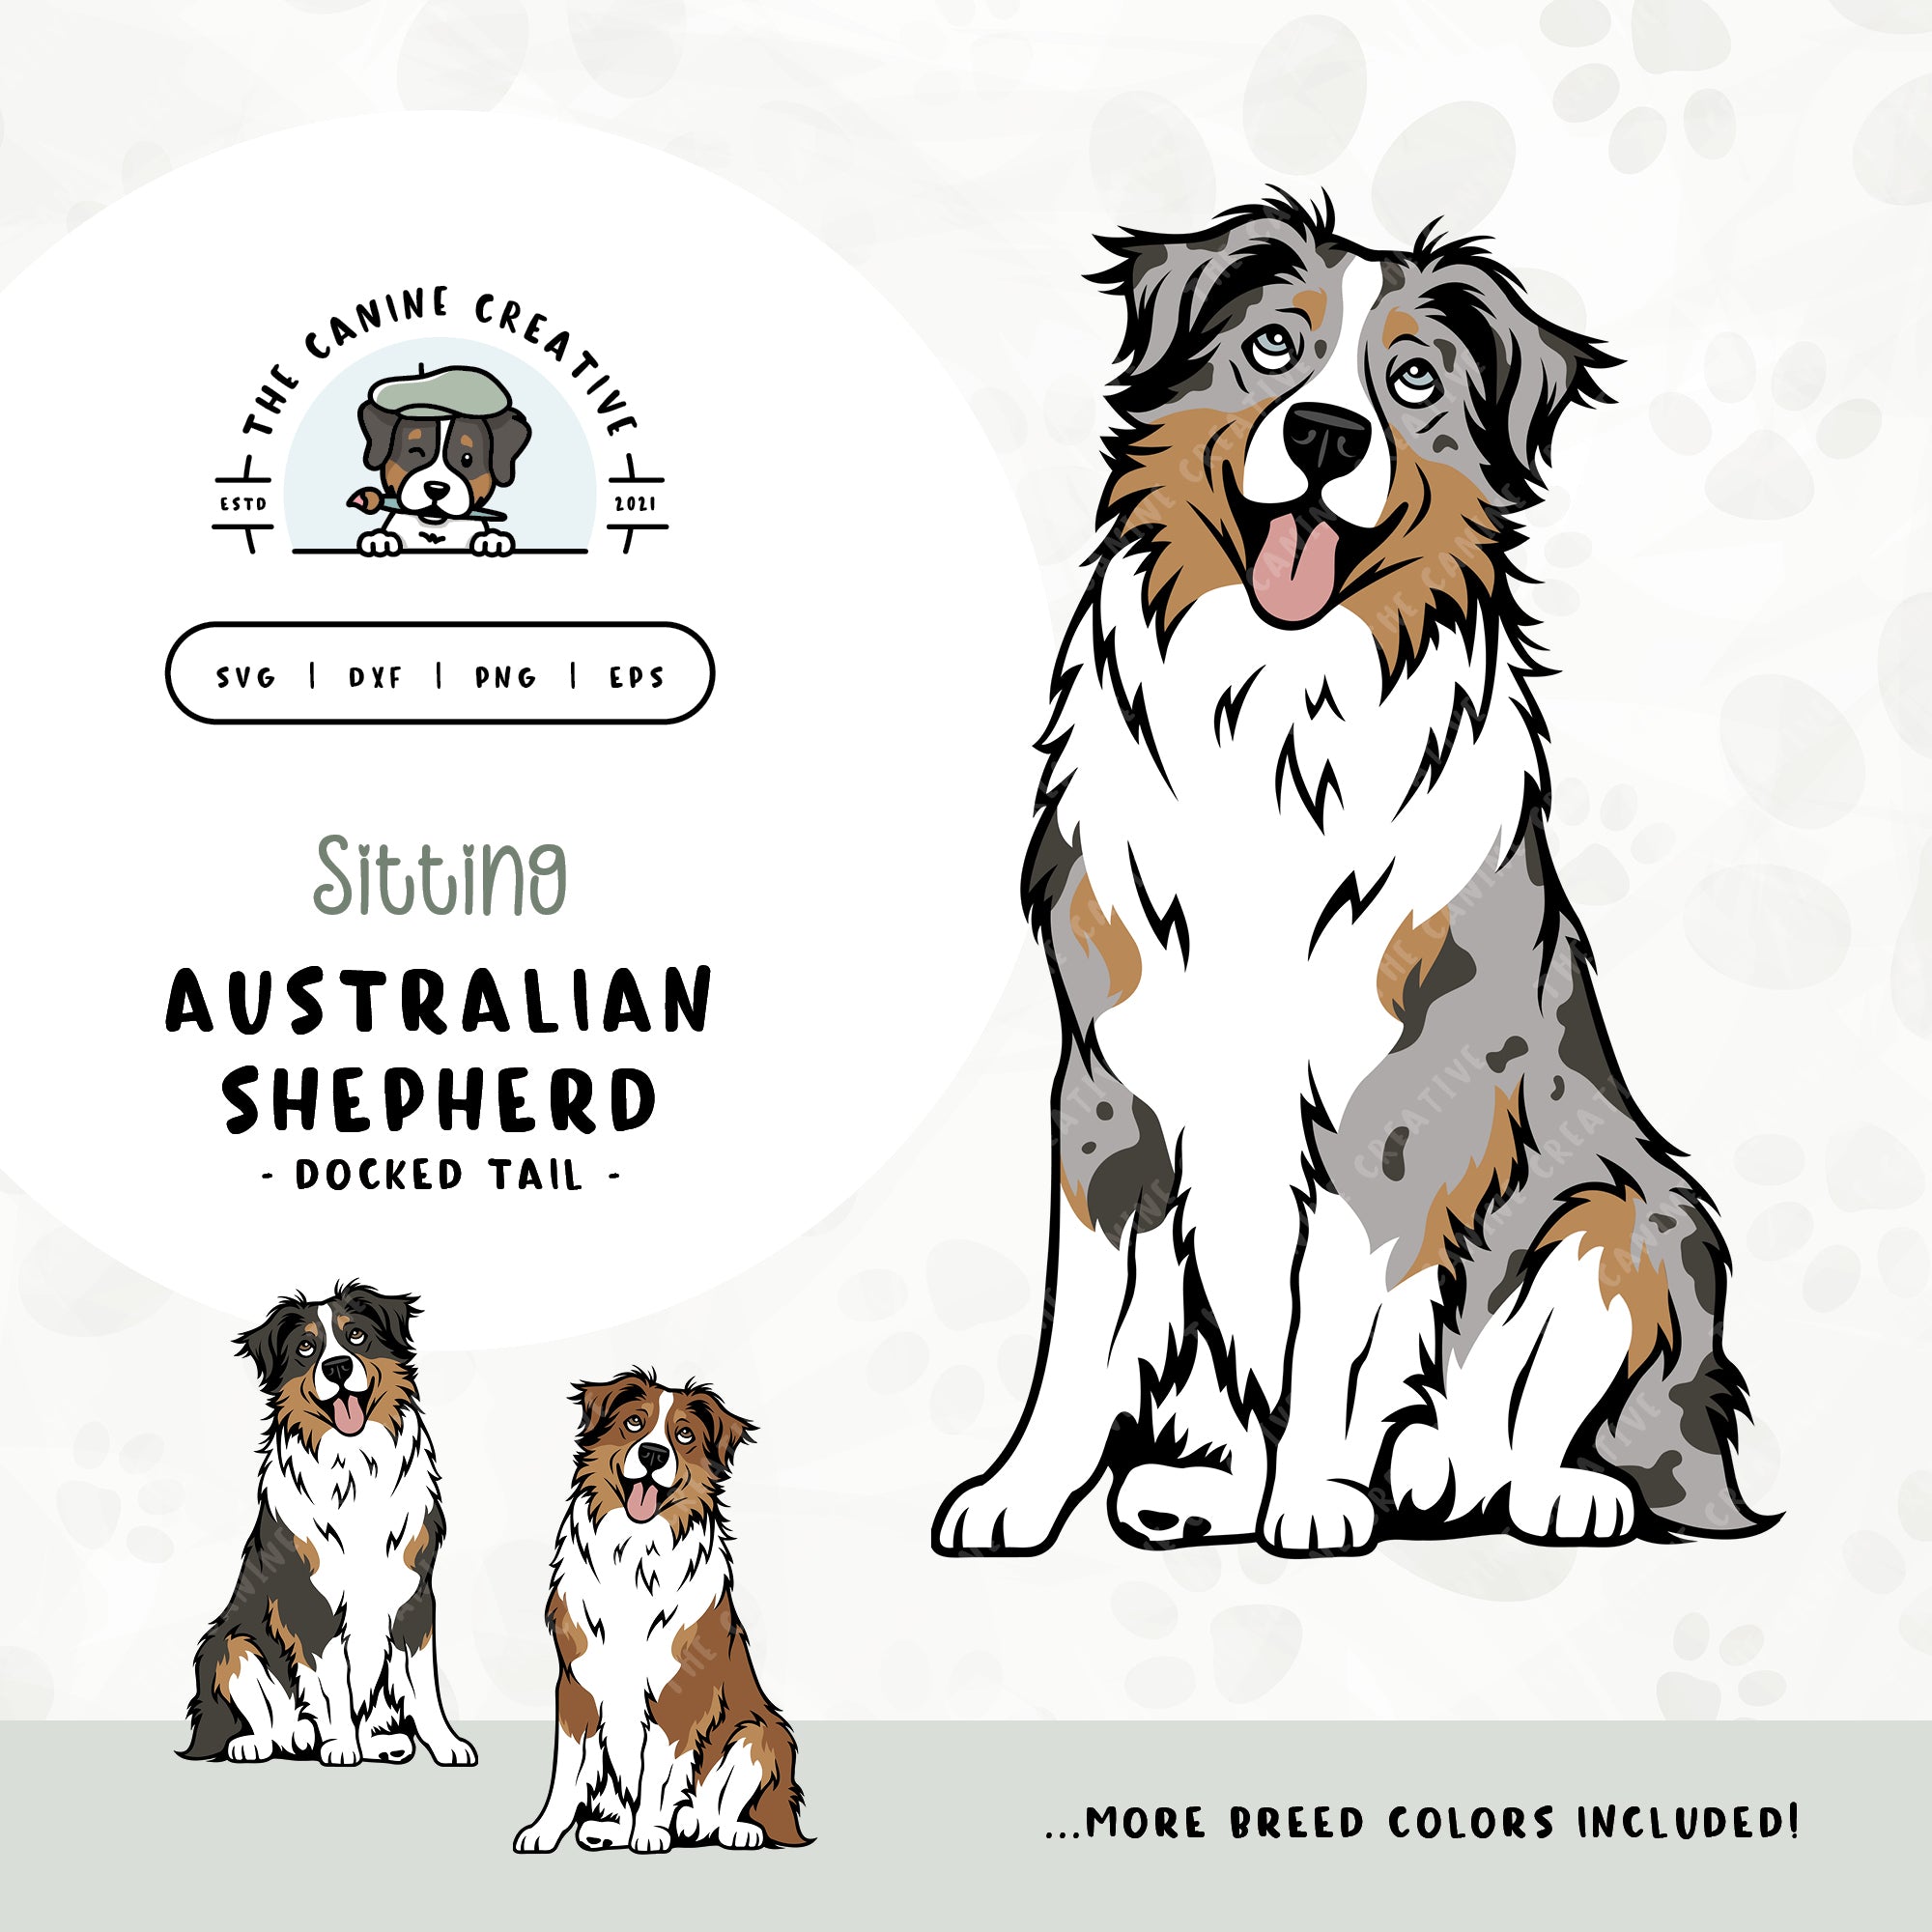 This sitting dog design features an Australian Shepherd with a docked tail. File formats include: SVG, DXF, PNG, and EPS.